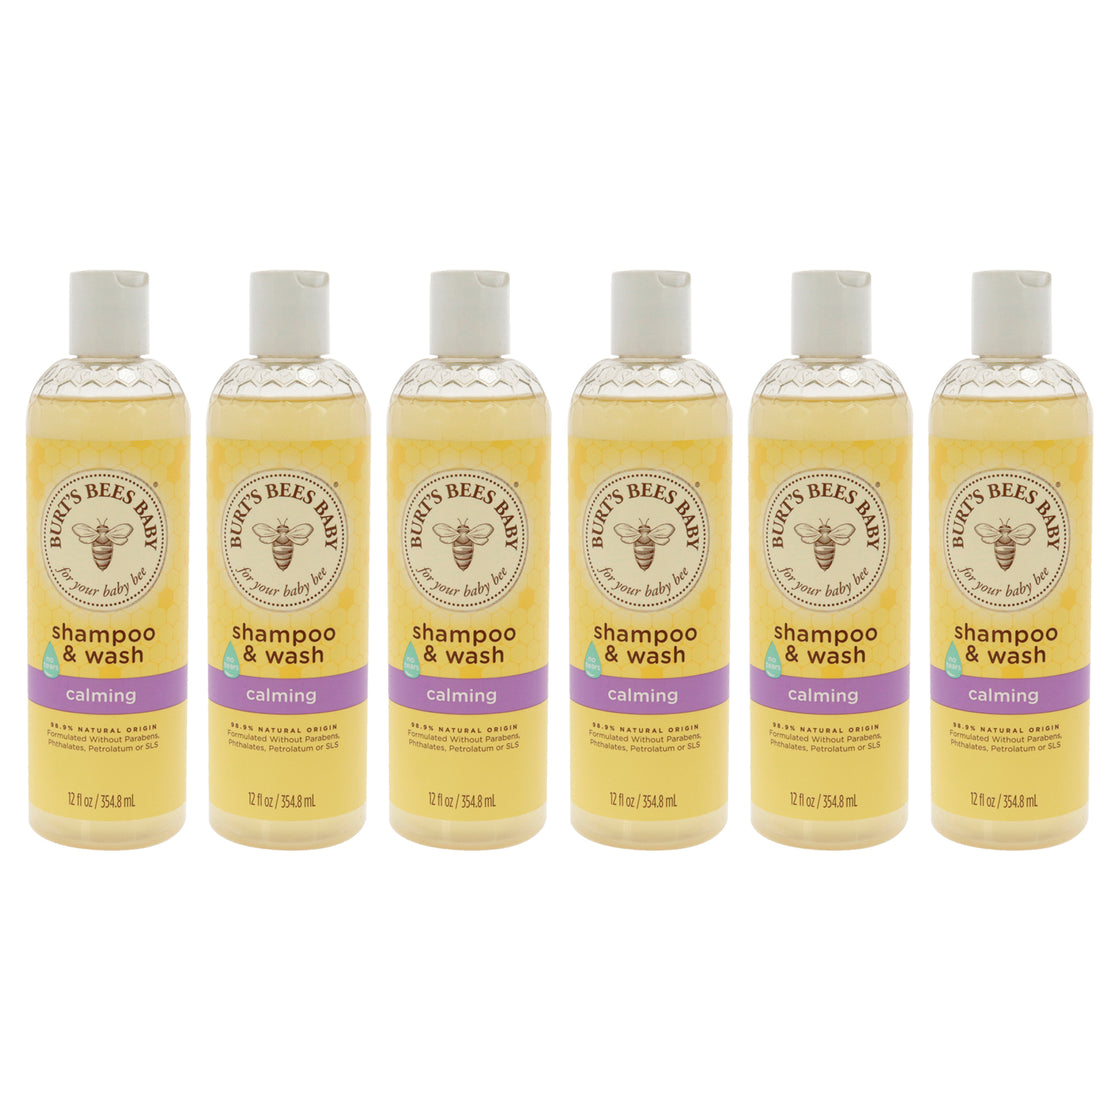 Baby Shampoo and Wash Calming by Burts Bees for Kids - 12 oz Shampoo and Body Wash - Pack of 6